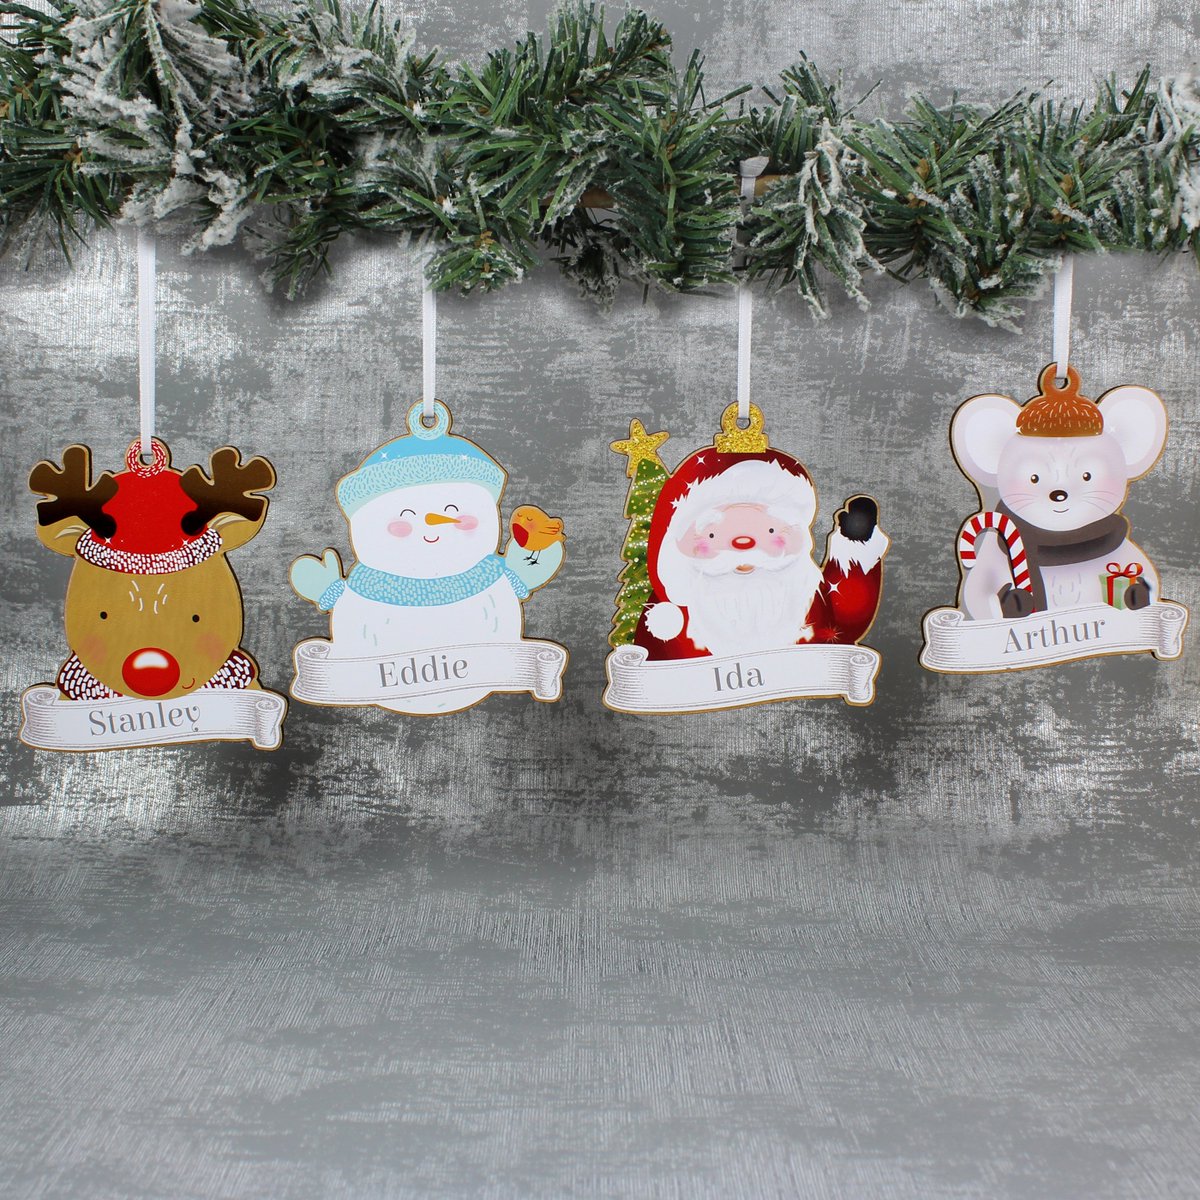 If you're planning ahead & already thinking about Christmas then take a look at this set of 4 wooden tree decorations that can be personalised with a name on each lilyblueuk.co.uk/christmas-gift…

#Christmas2023 #planahead #shopearly #personalised #shopindie